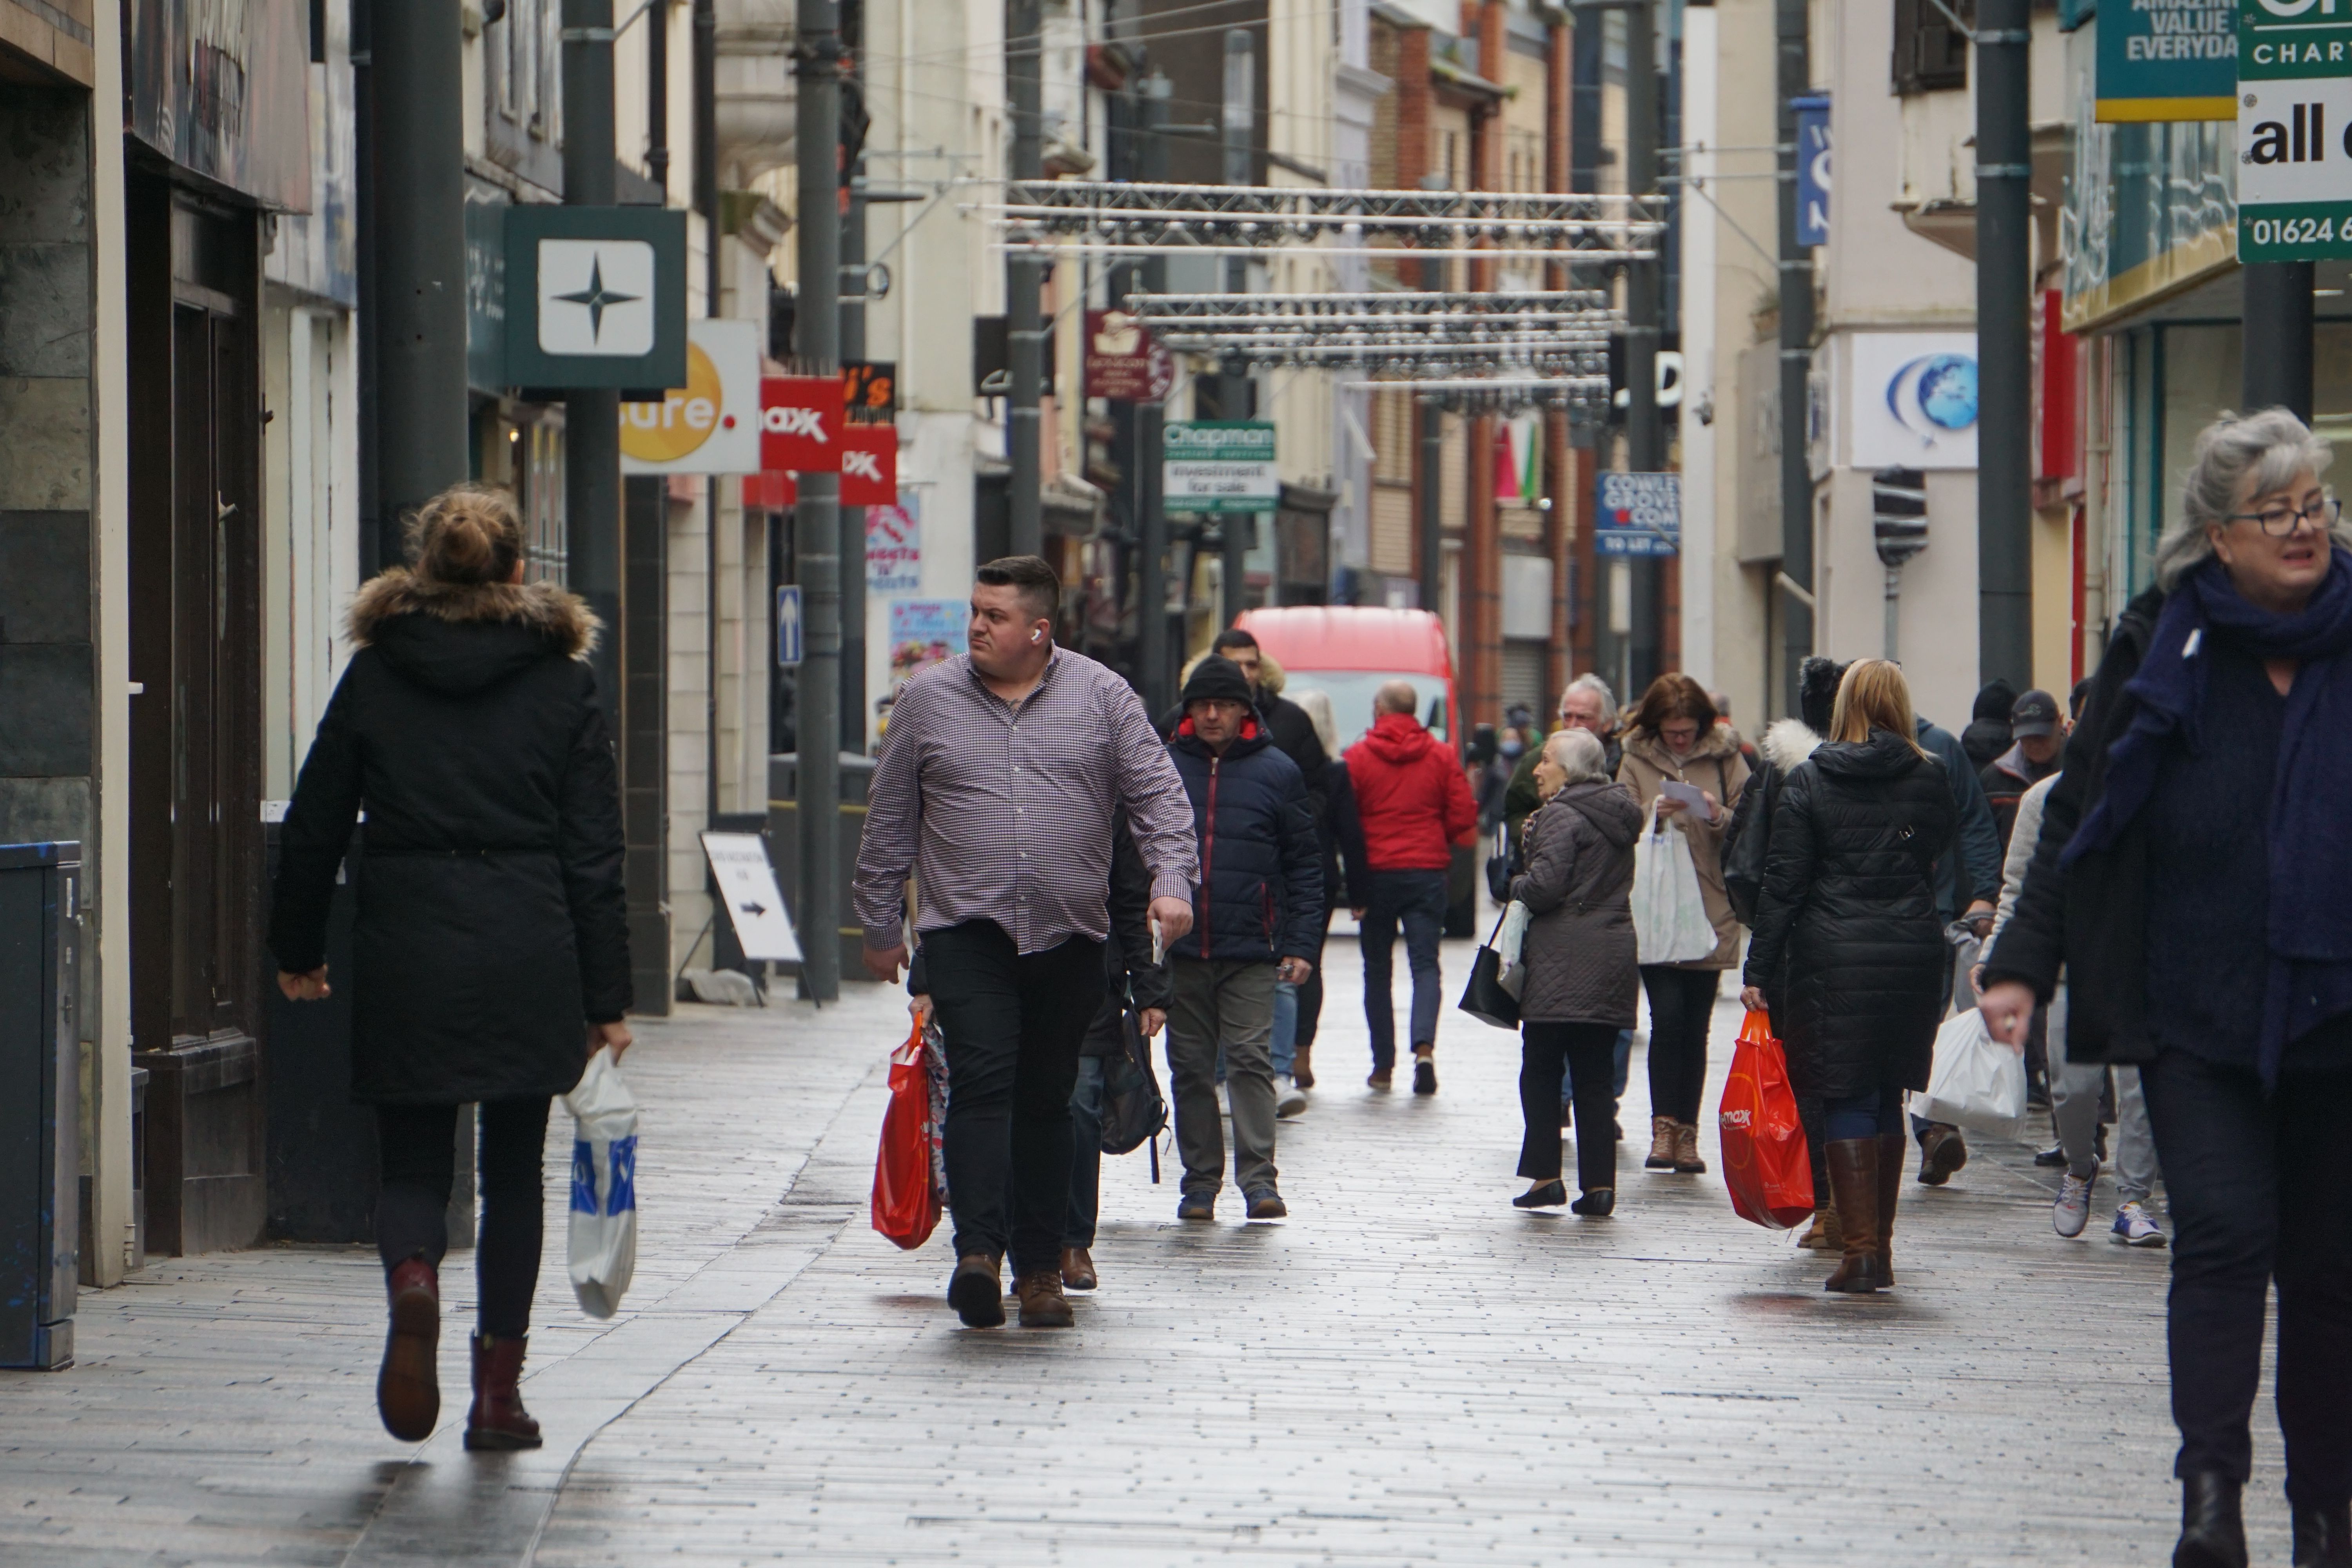 NO FACE MASKS: Shoppers in Strand Street, Douglas, Isle of Man